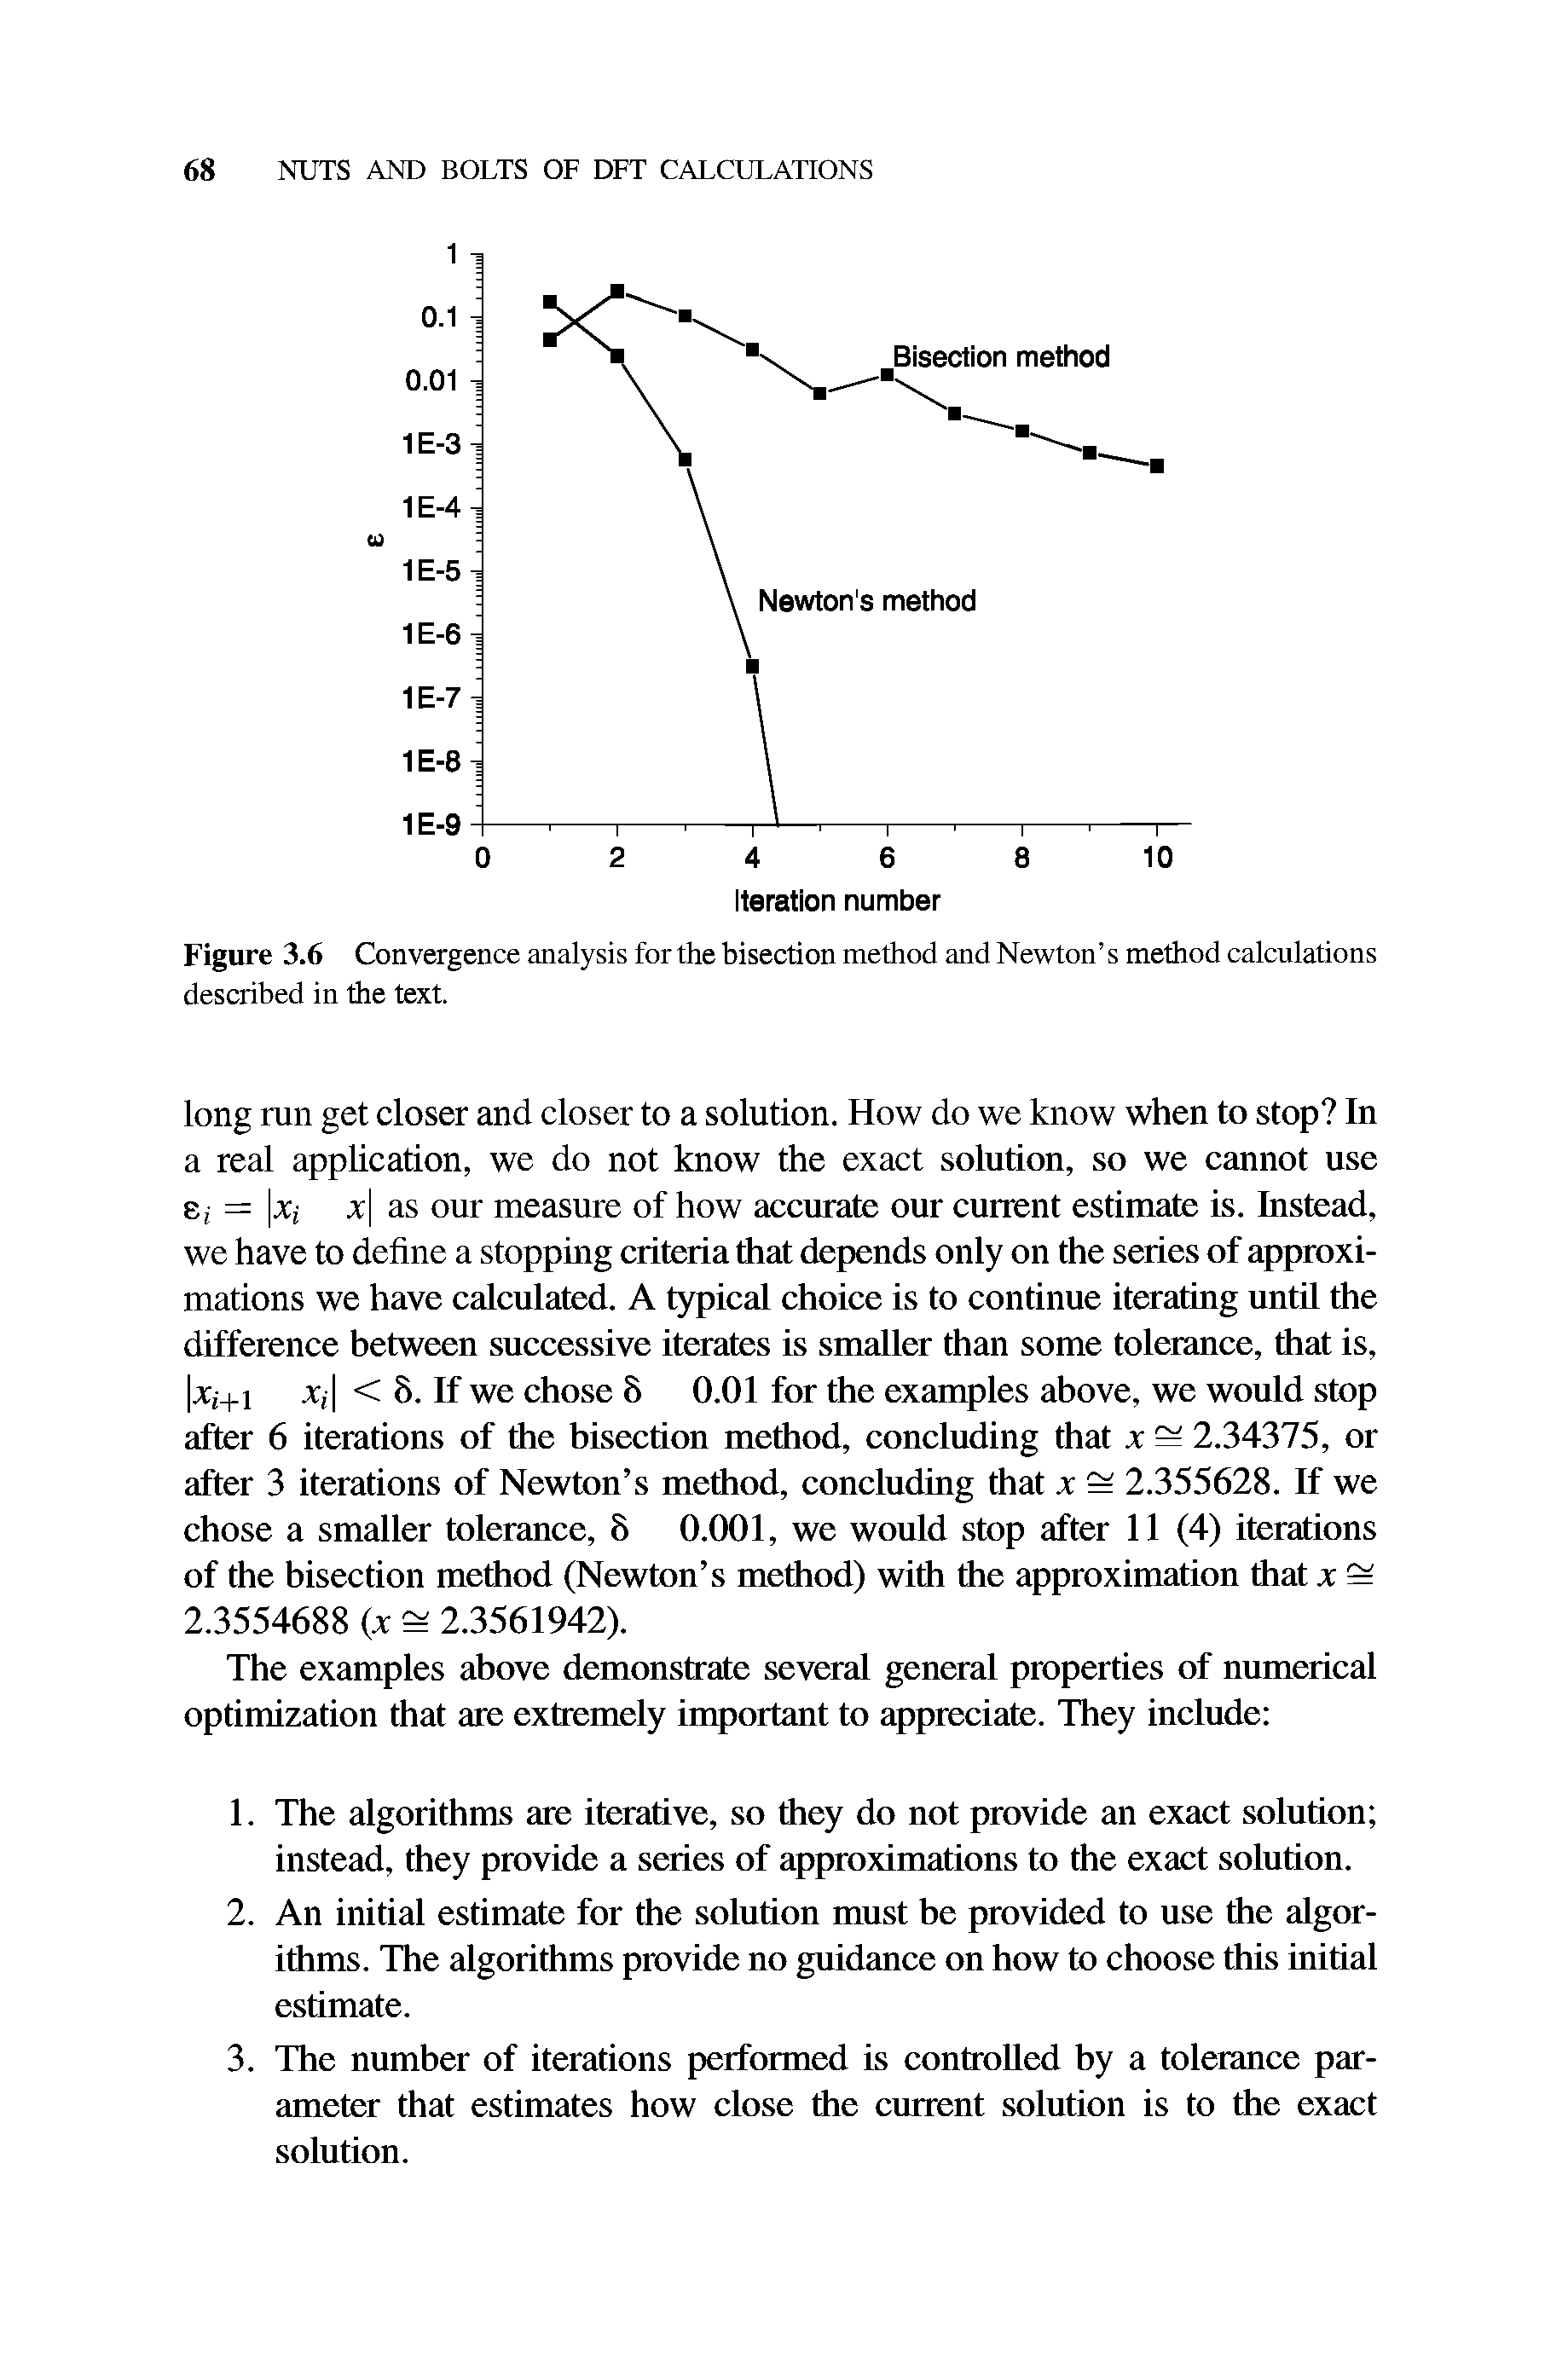 Figure 3.6 Convergence analysis for the bisection method and Newton s method calculations described in the text.